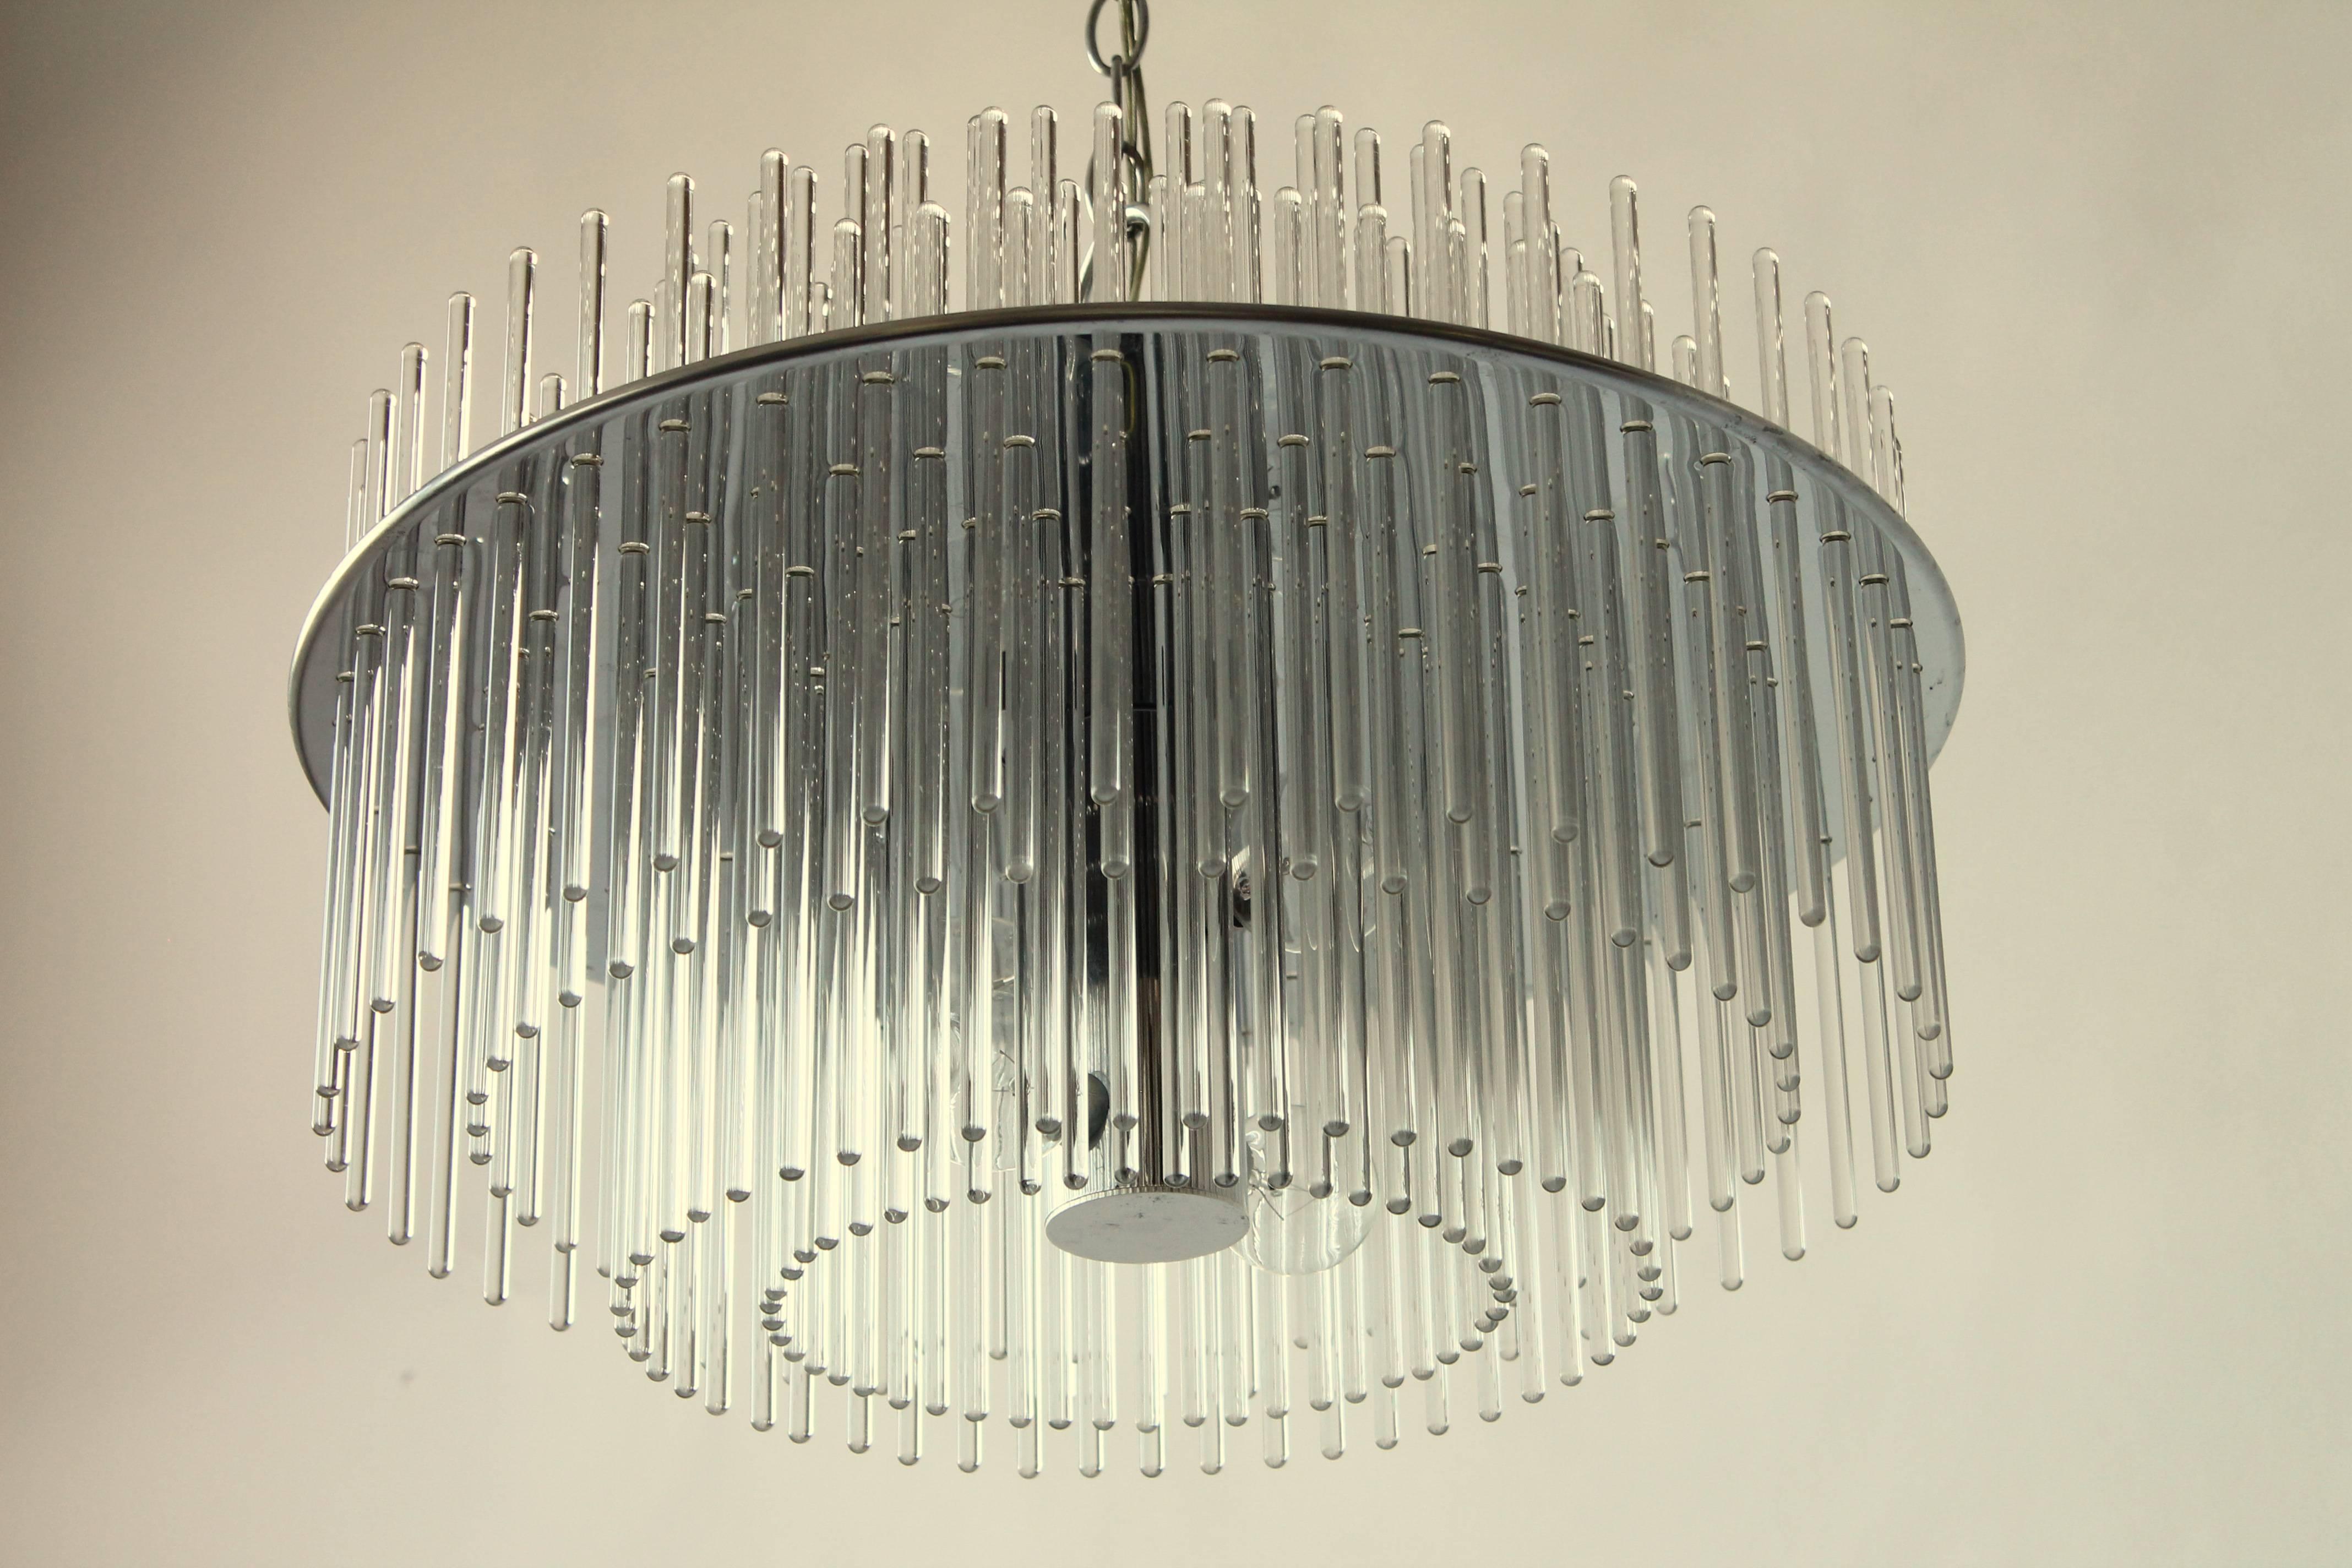 Plated Classic Glass Rod Chandelier from Lightolier, 1980s, USA